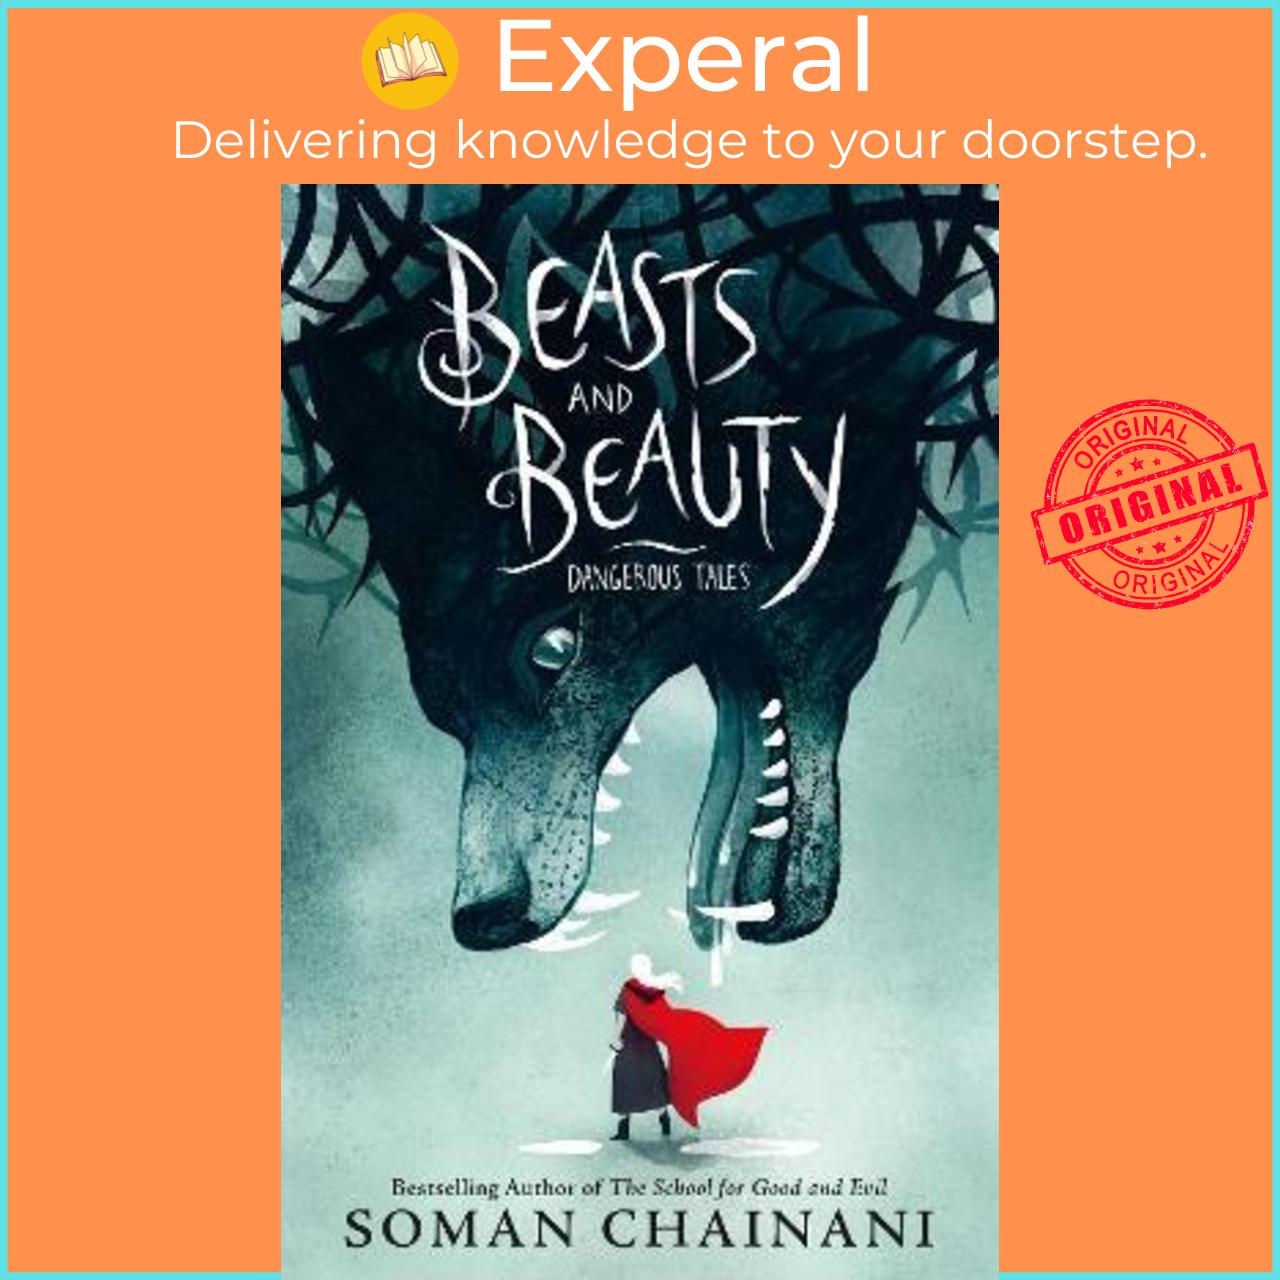 Sách - Beasts and Beauty by Soman Chainani (US edition, paperback)